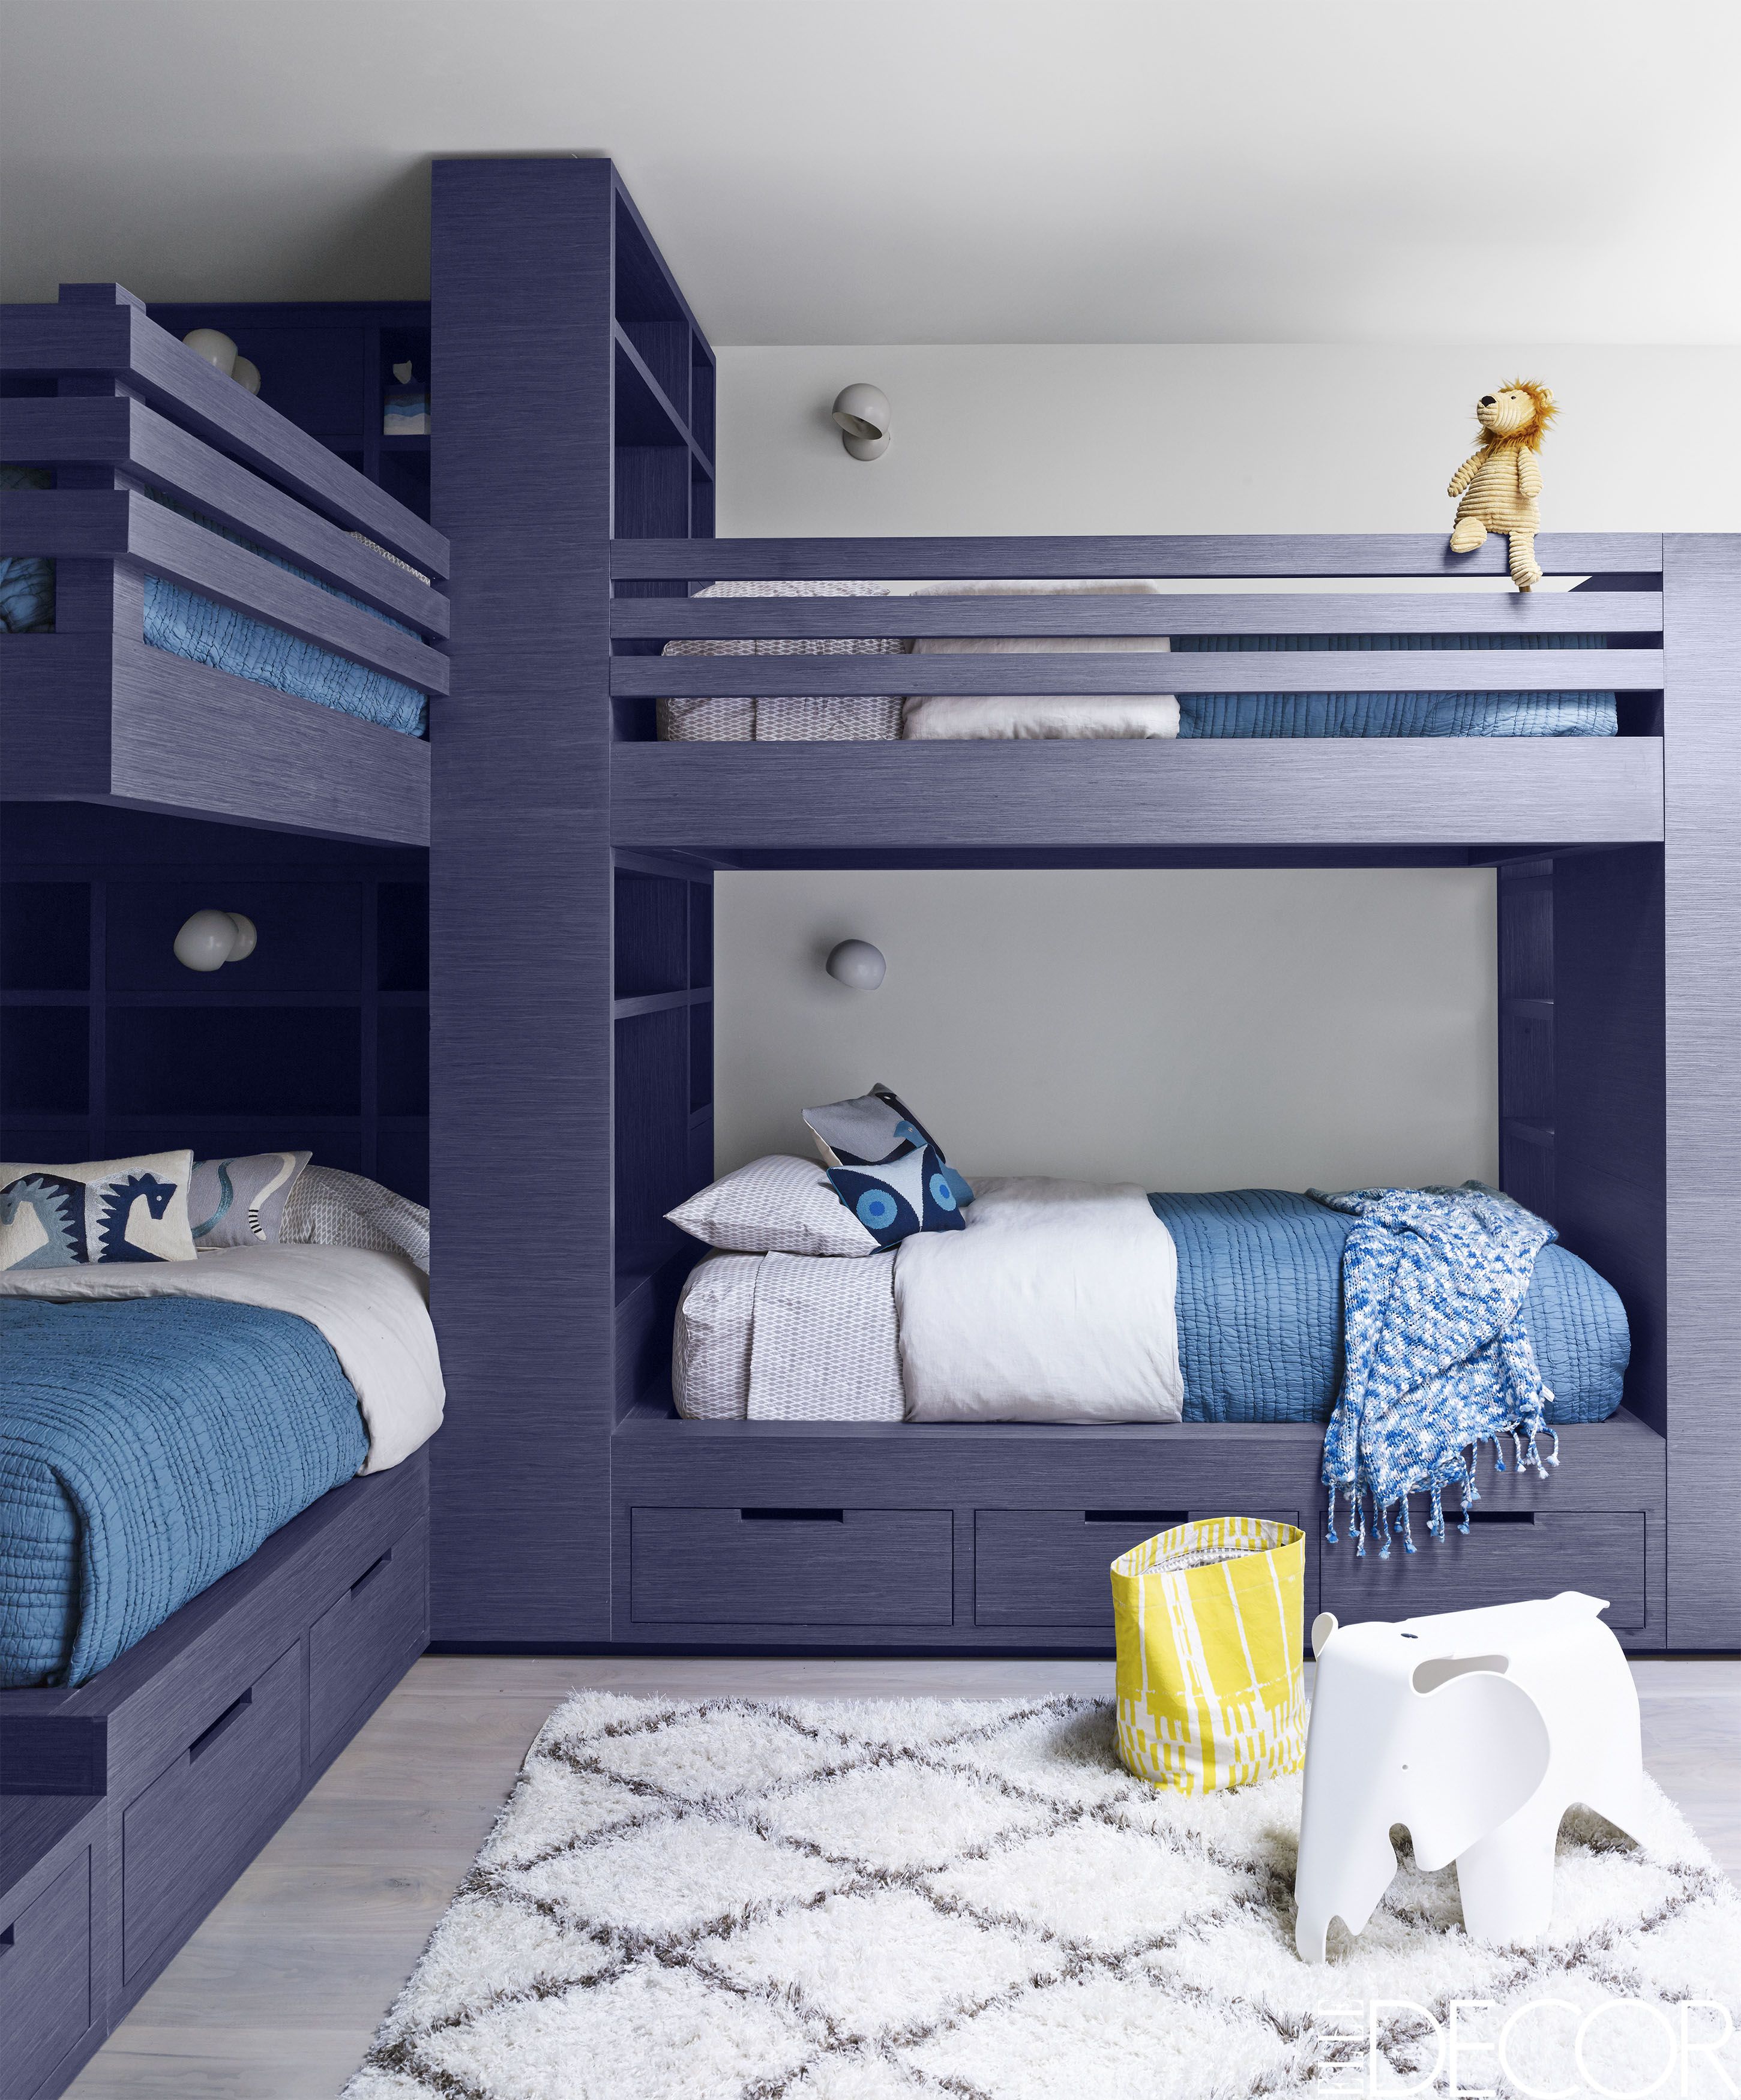 Boys Bedroom Ideas 20 Amazing Boys Bedroom Ideas - Decorate a Chic and Youthful Room AWPGXXO